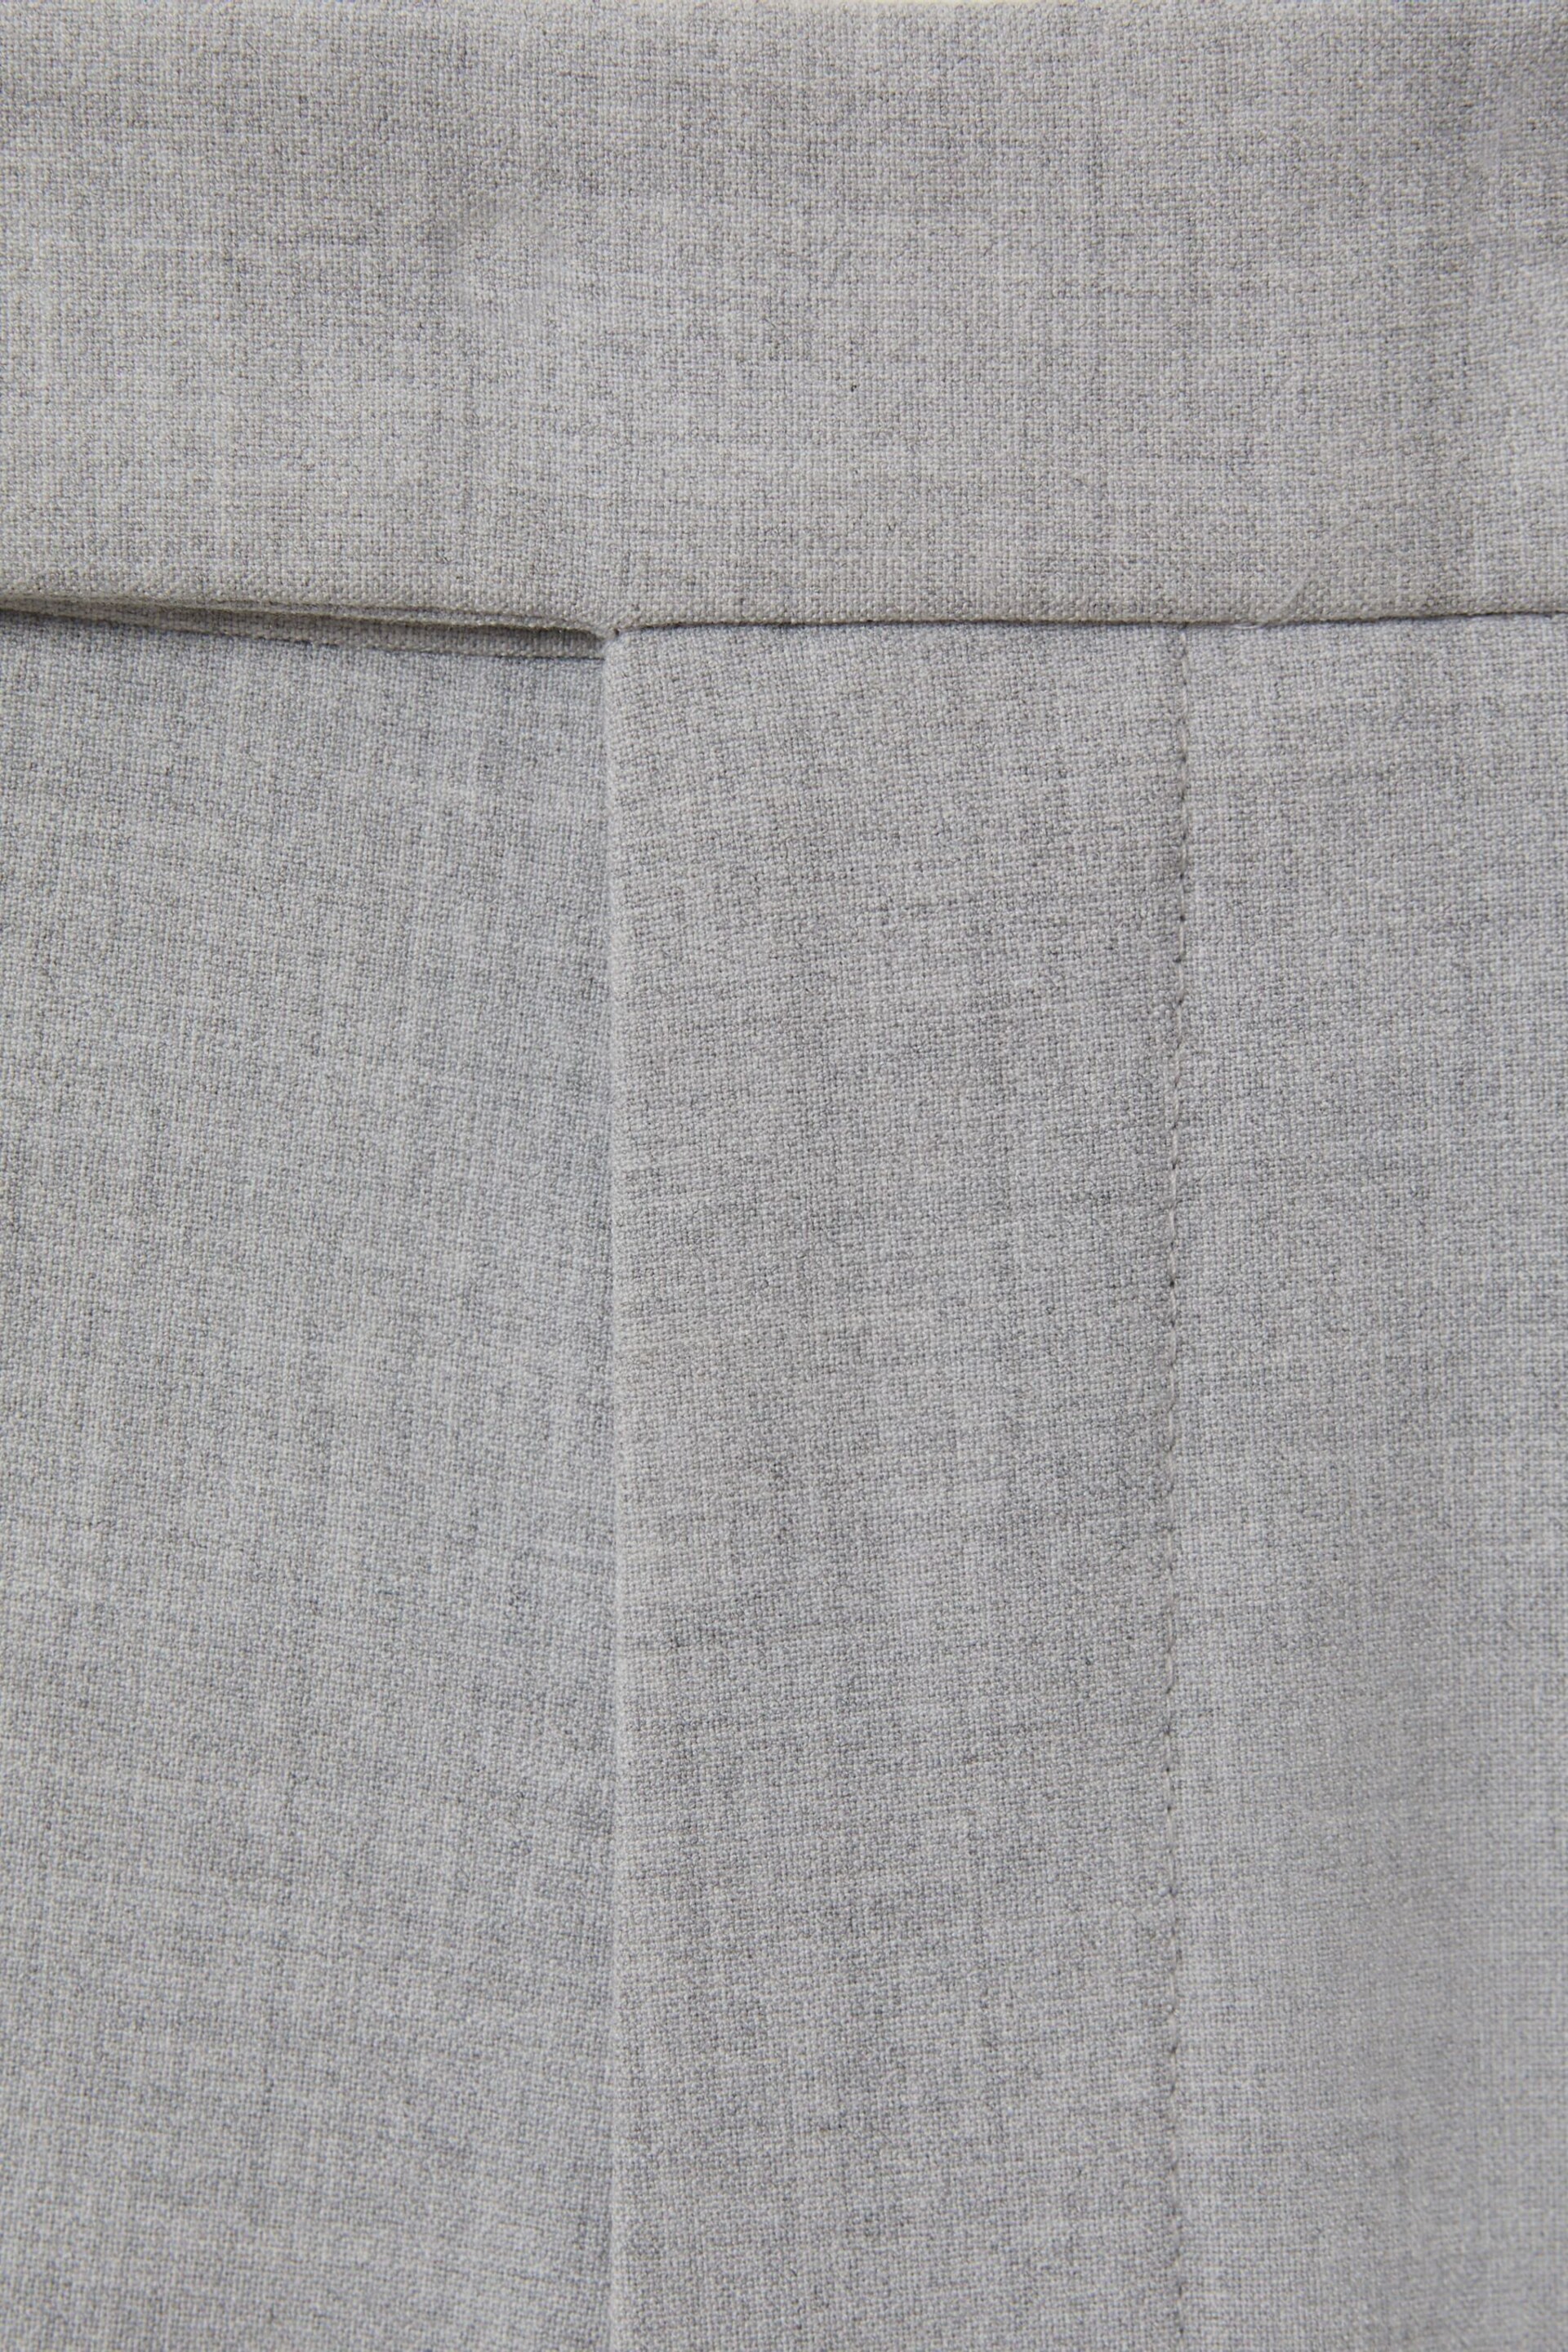 Reiss Grey Found Relaxed Drawstring Trousers - Image 5 of 5